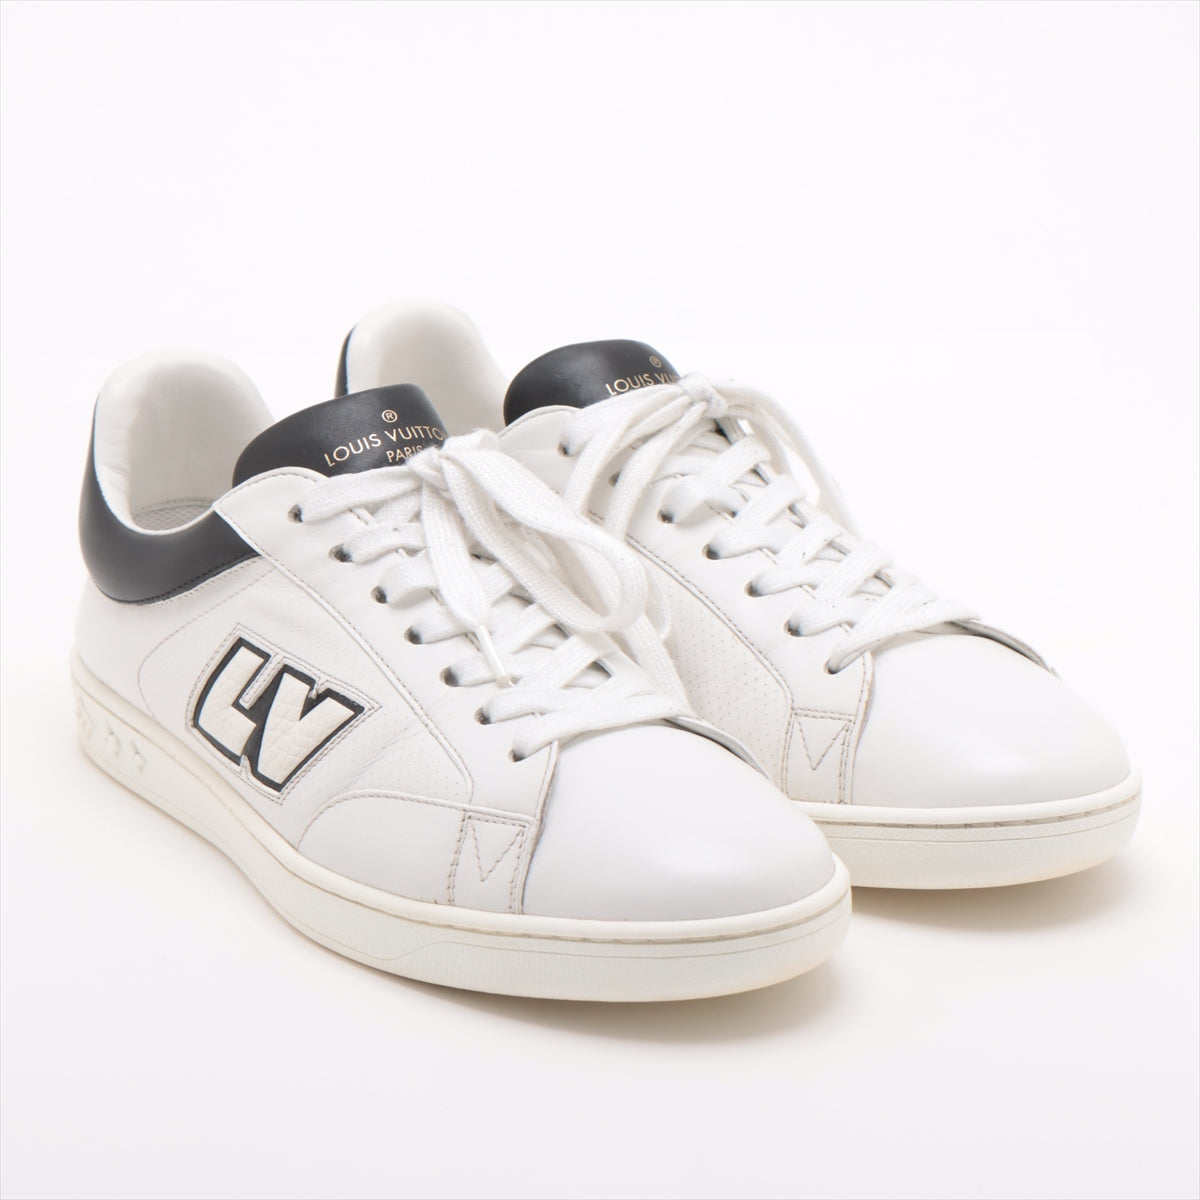 Louis Vuitton Luxembourg Line 21 years Leather Sneakers 6 Men's White FA0231